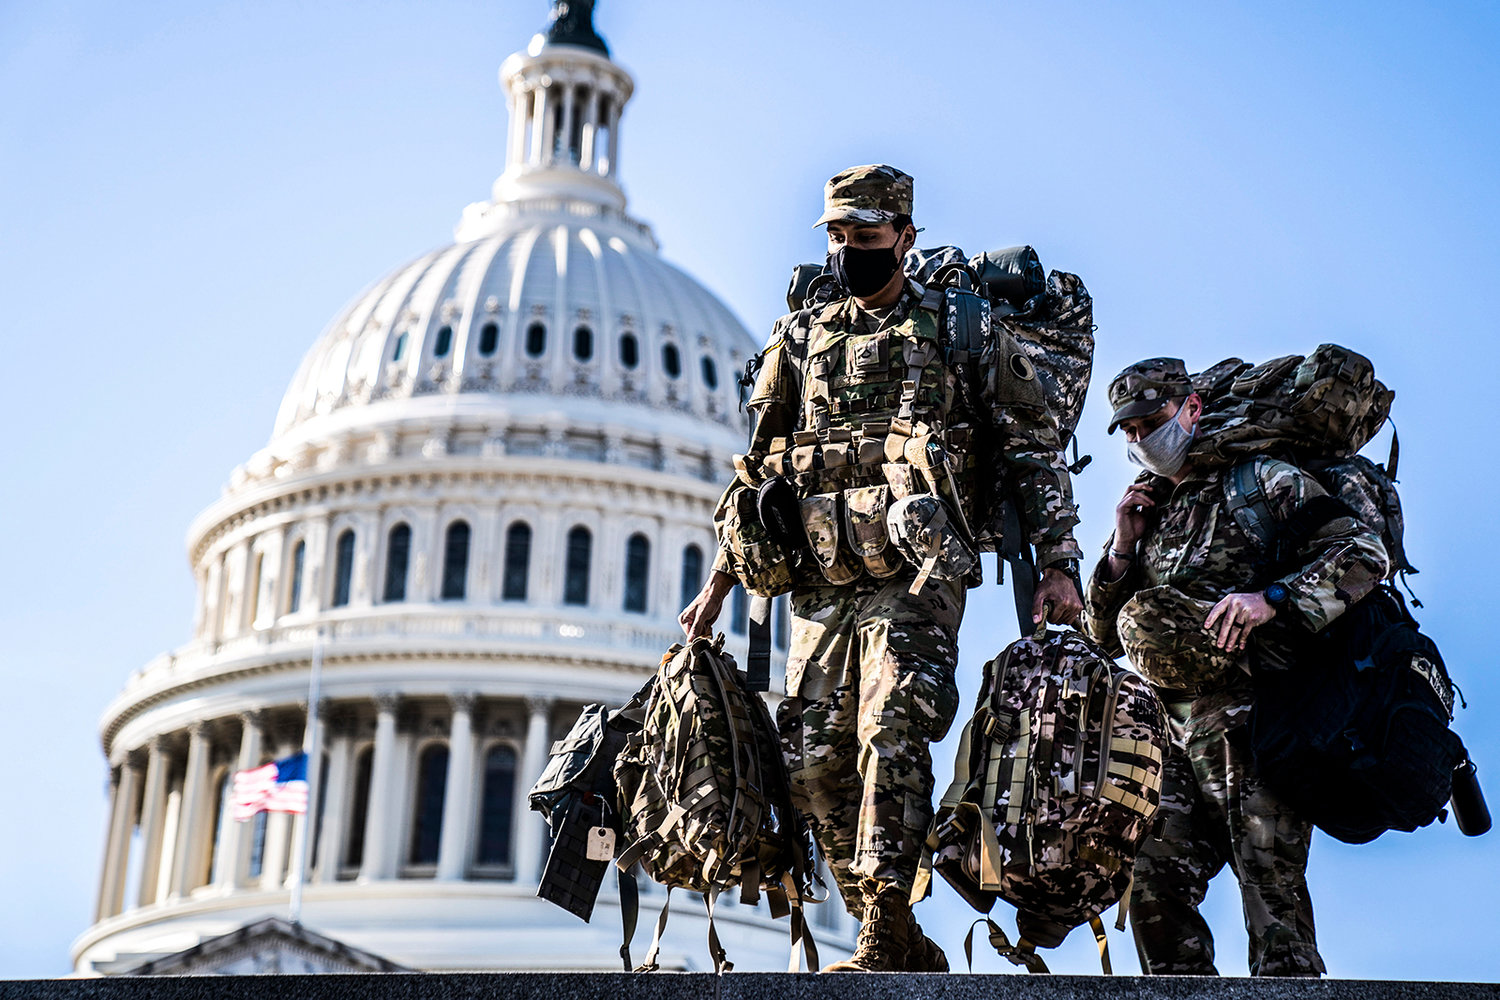 Members of the National Guard carry supplies near the U.S. Capitol on Jan. 14, 2021. Capitol Police and D.C. government officials have requested the National Guard’s assistance with a truck convoy headed to Washington, D.C. (Kent Nishimura/Los Angeles Times/TNS)